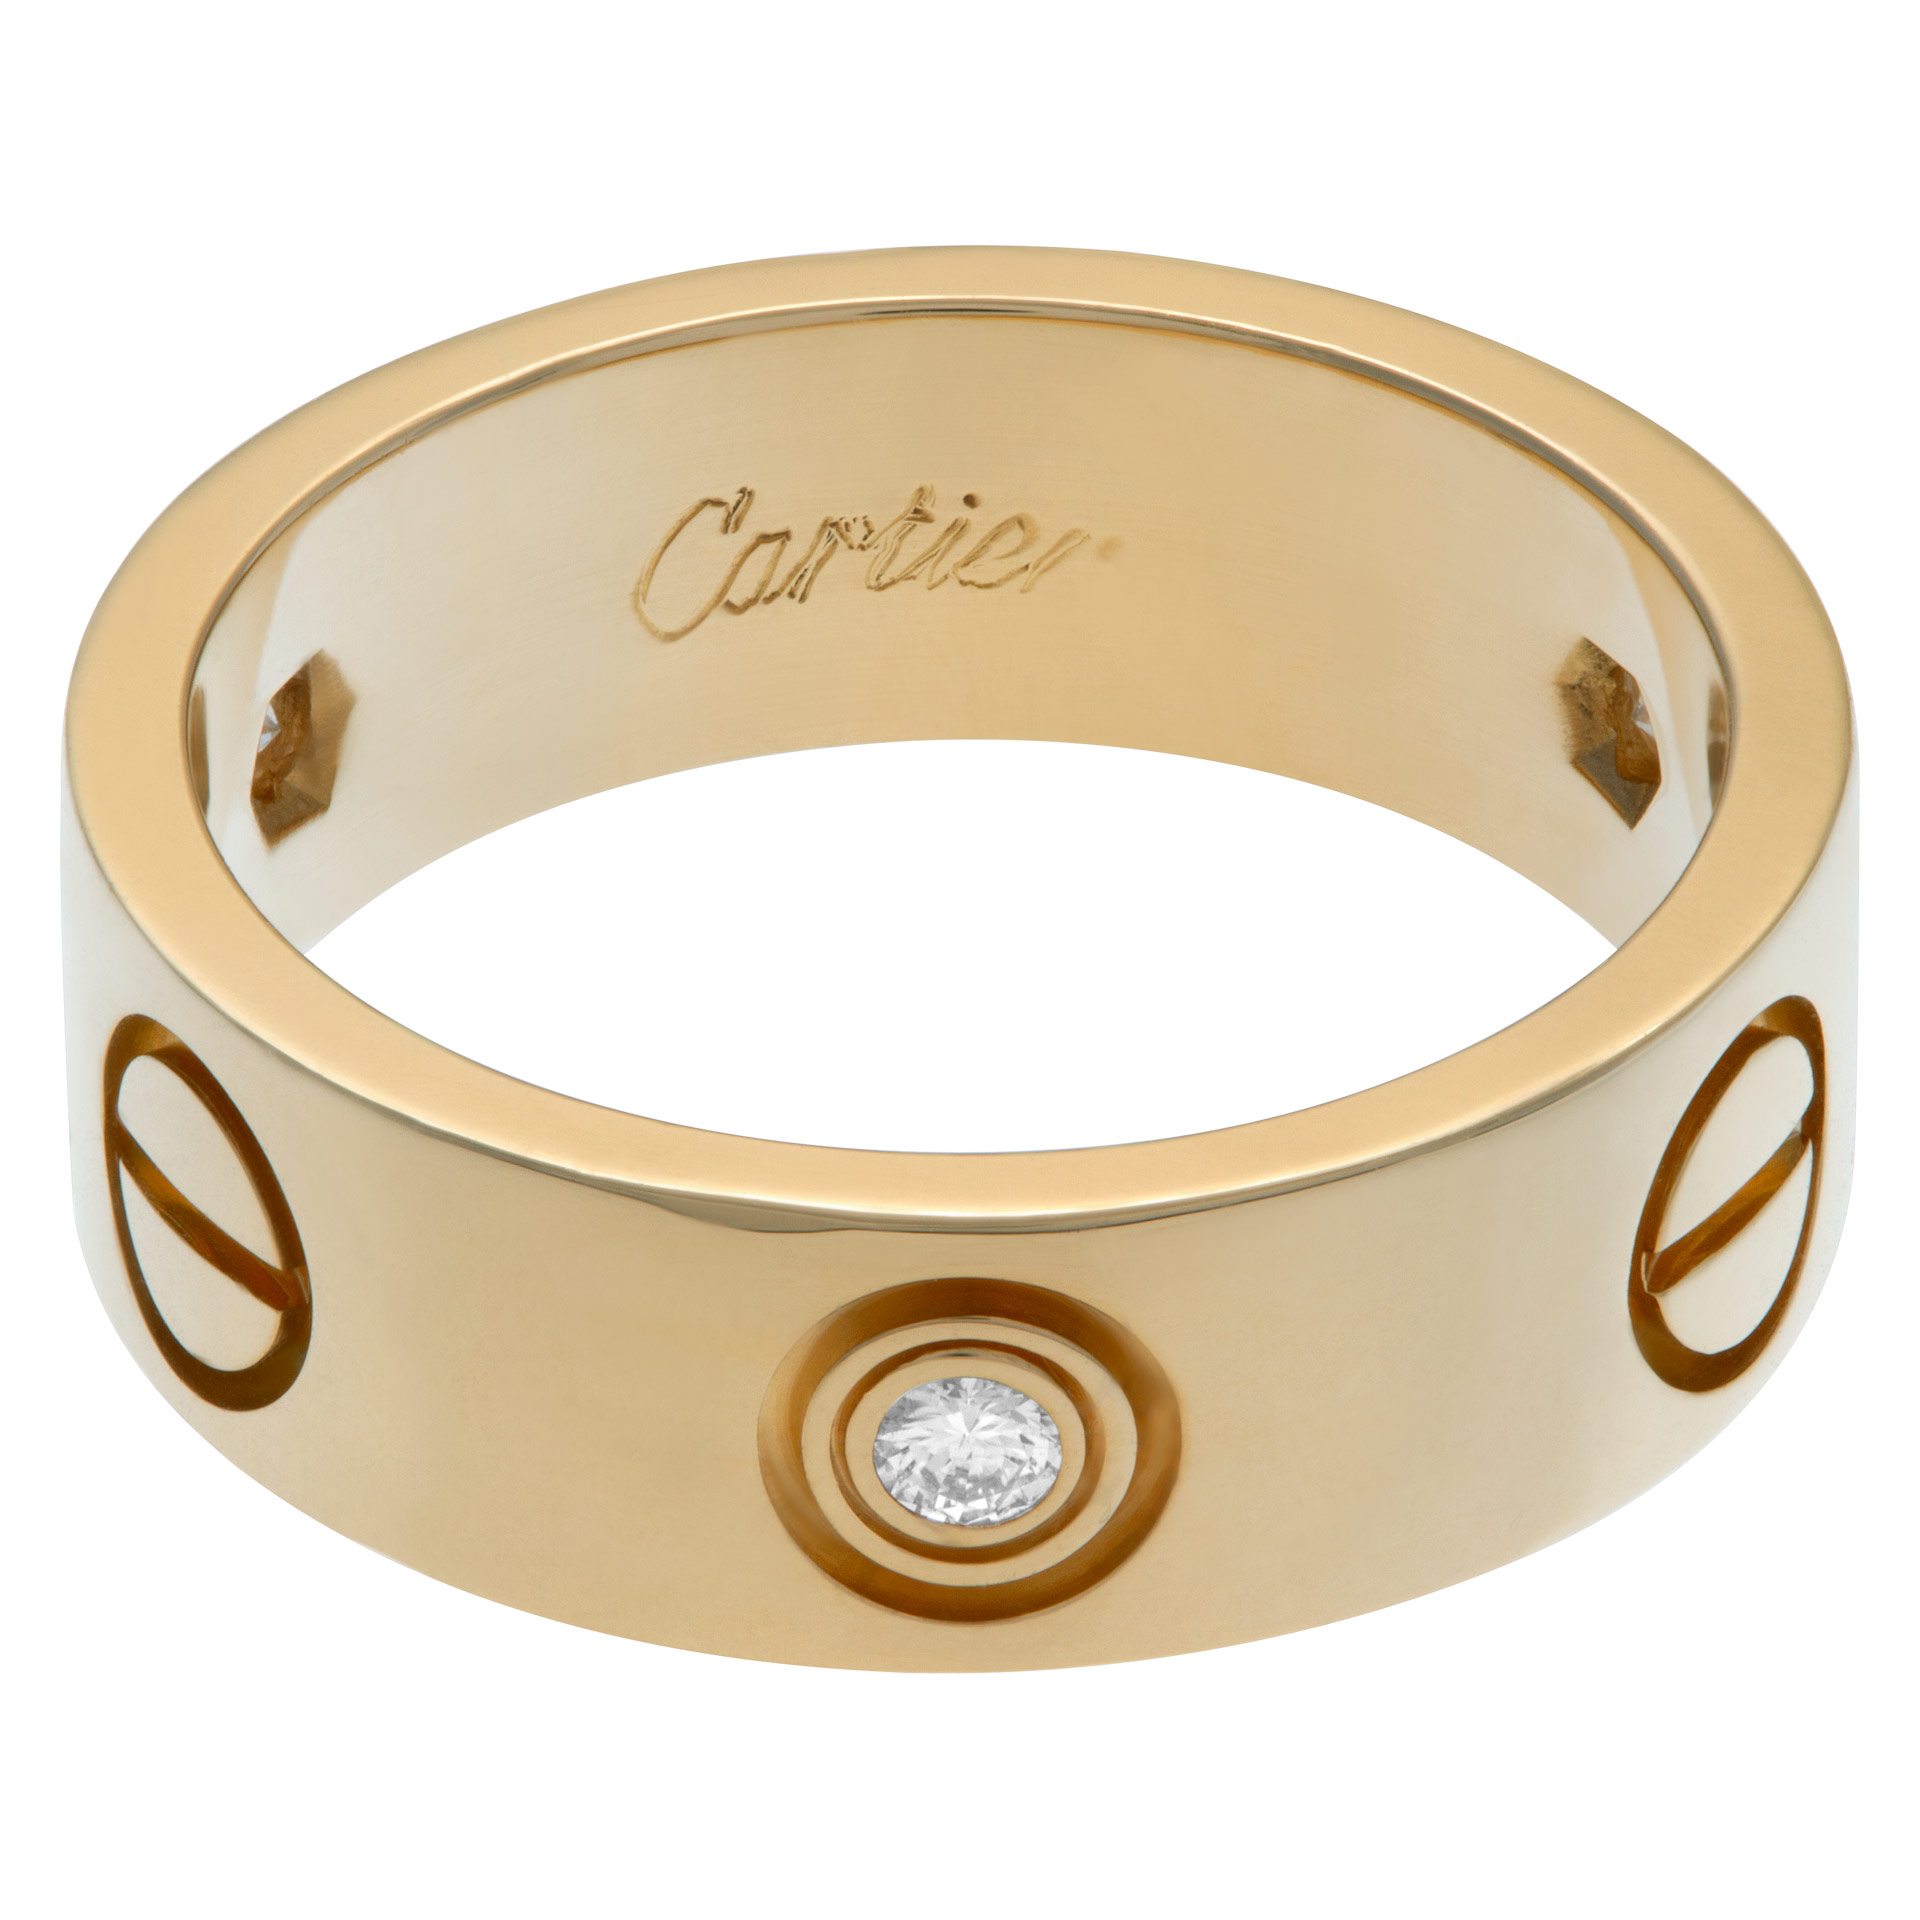 Cartier Love ring in 18k yellow gold with 3 diamonds. Euro size 48 (US size 4.5) image 1